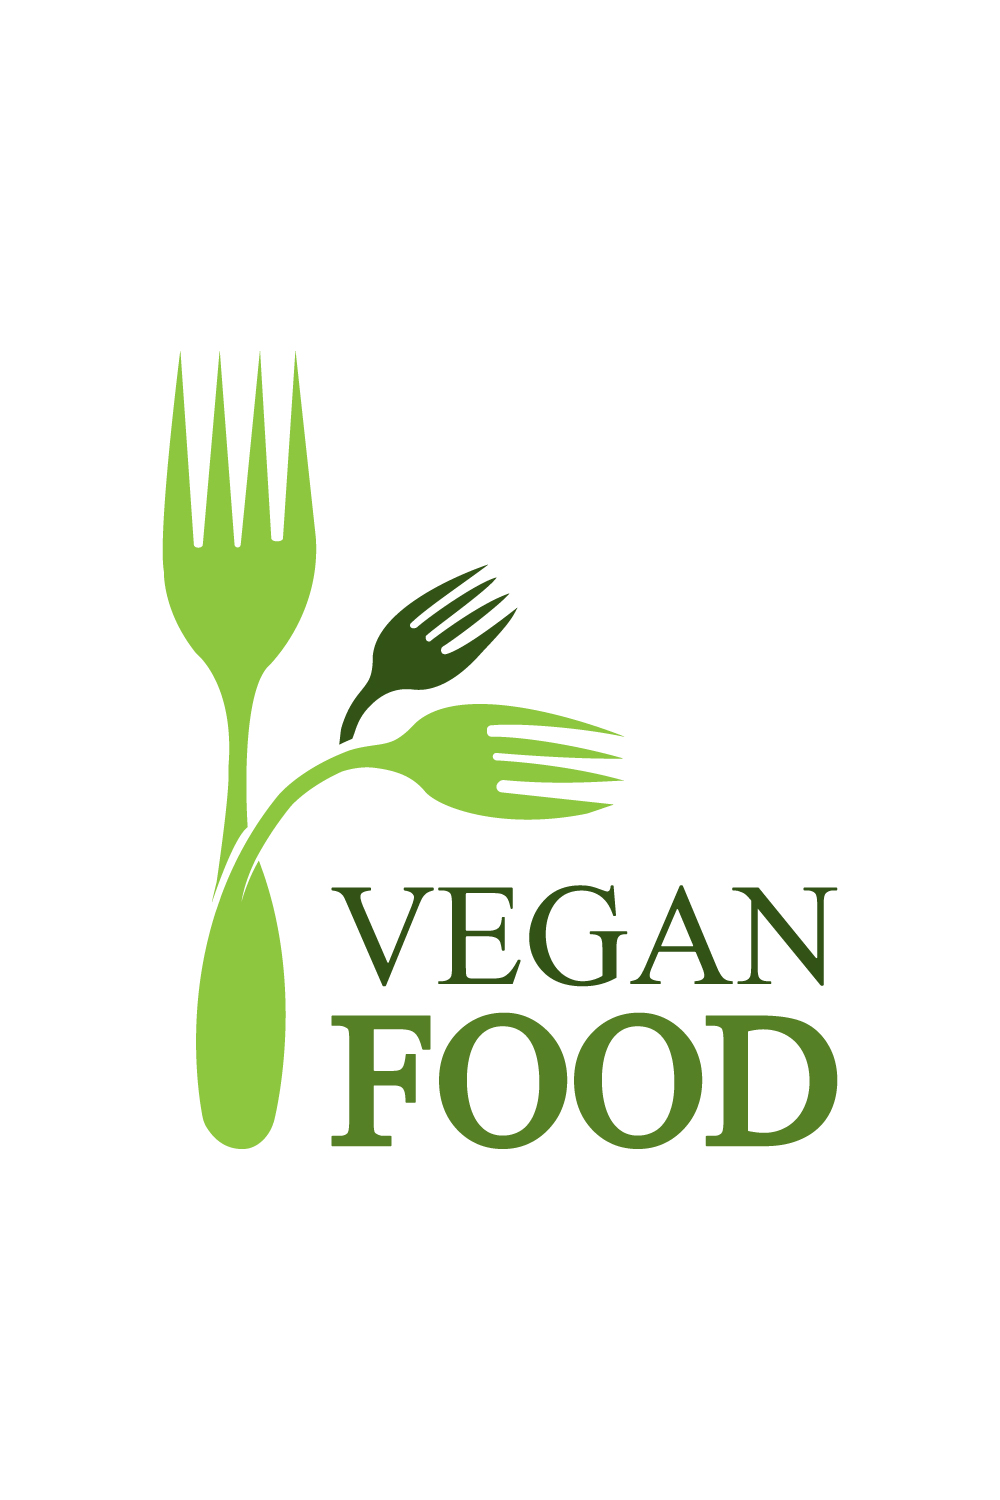 Natural Vegan food logo design vector images Organic food logo design Best Natural food logo best icon template illustration Chinees food best icon design pinterest preview image.